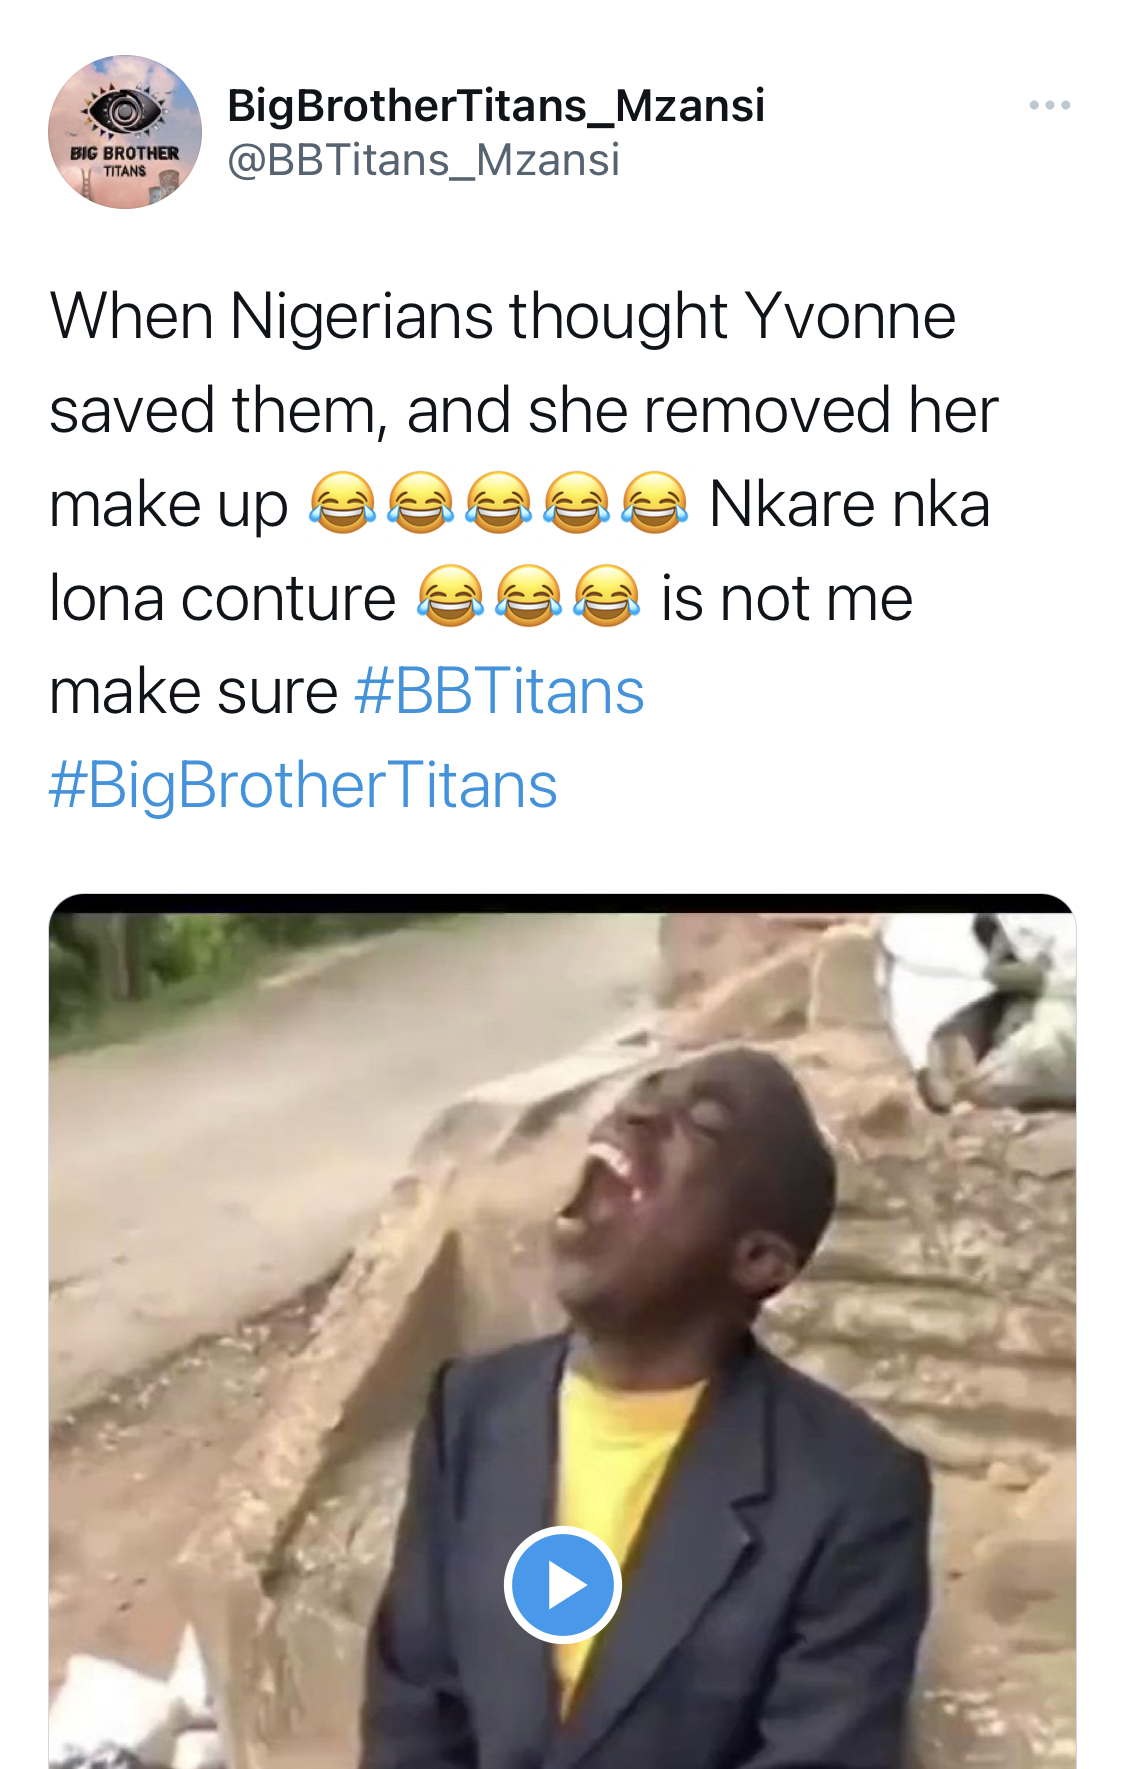 Fans react as BBTitans Yvonne Transforms after removing makeup [video]